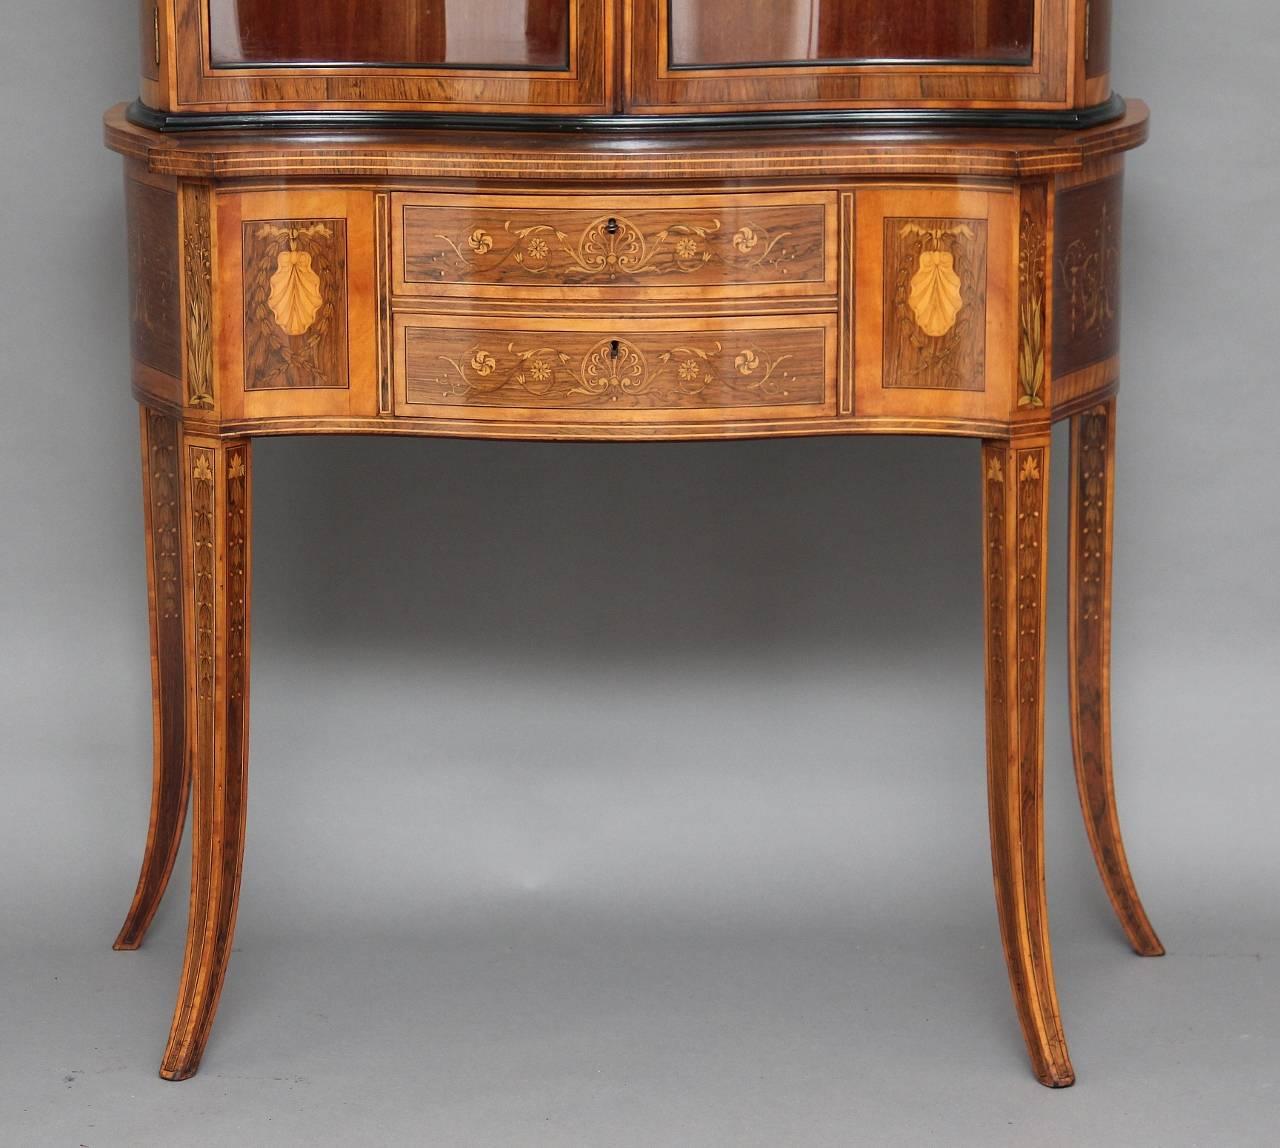 Inlay 19th Century Sheraton Revival Inlaid Rosewood Display Cabinet